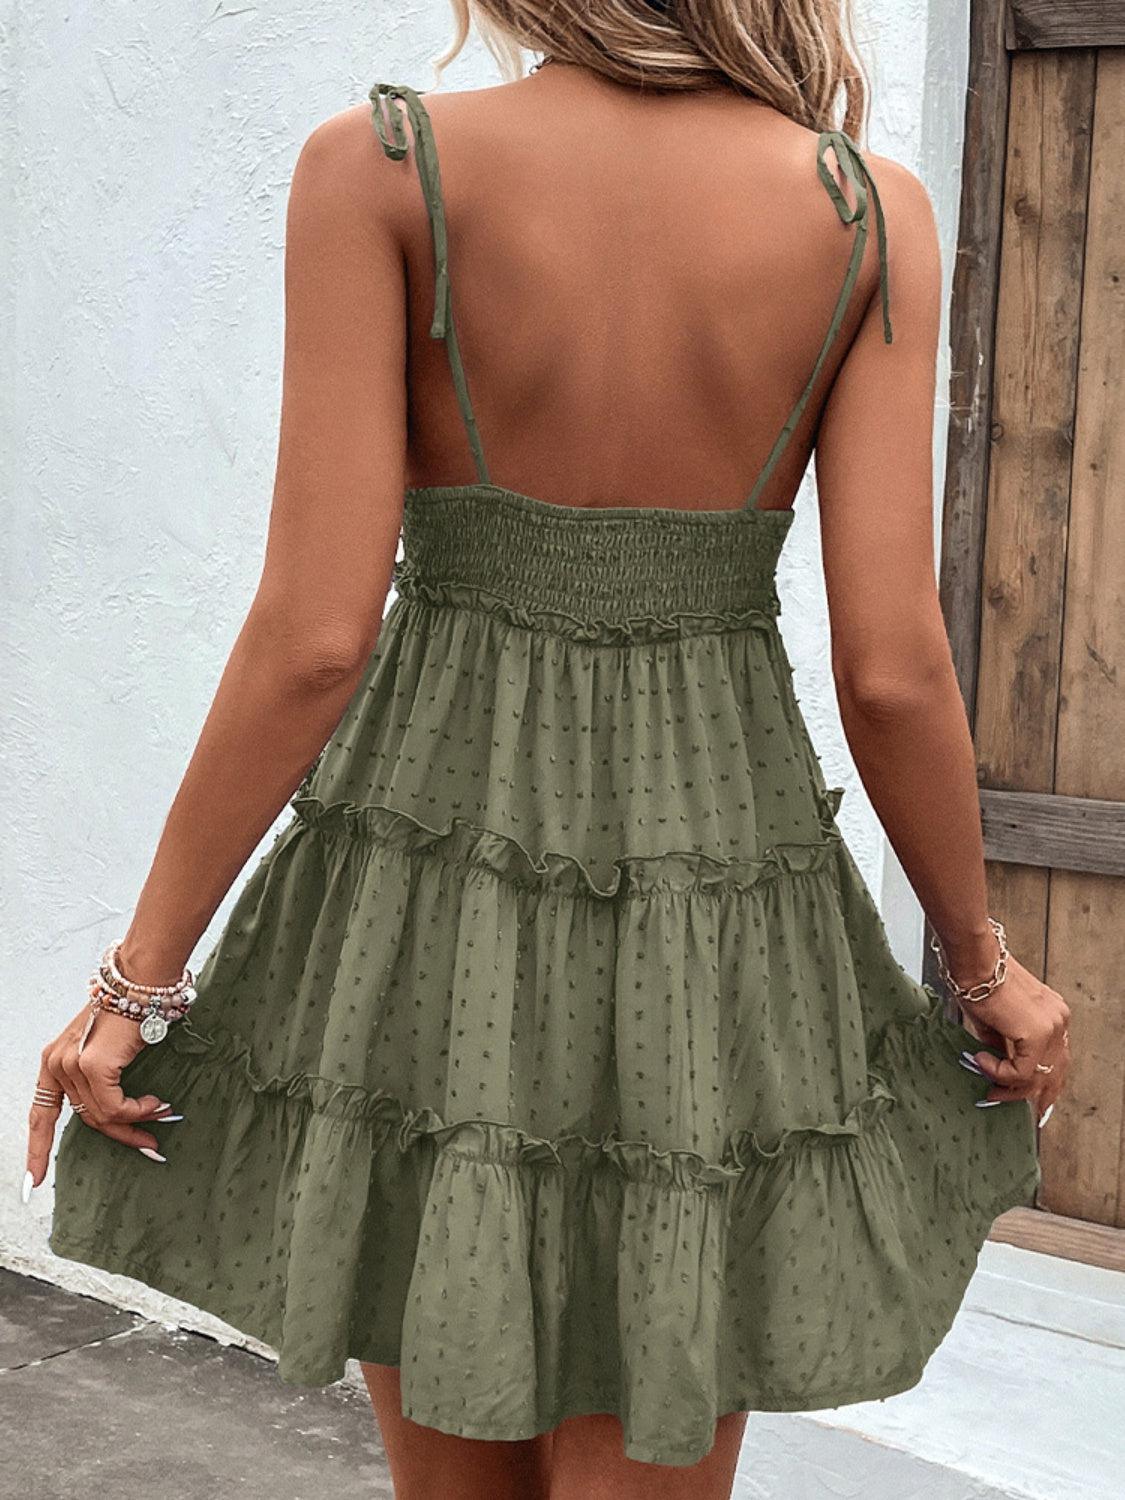 the back of a woman wearing a green dress